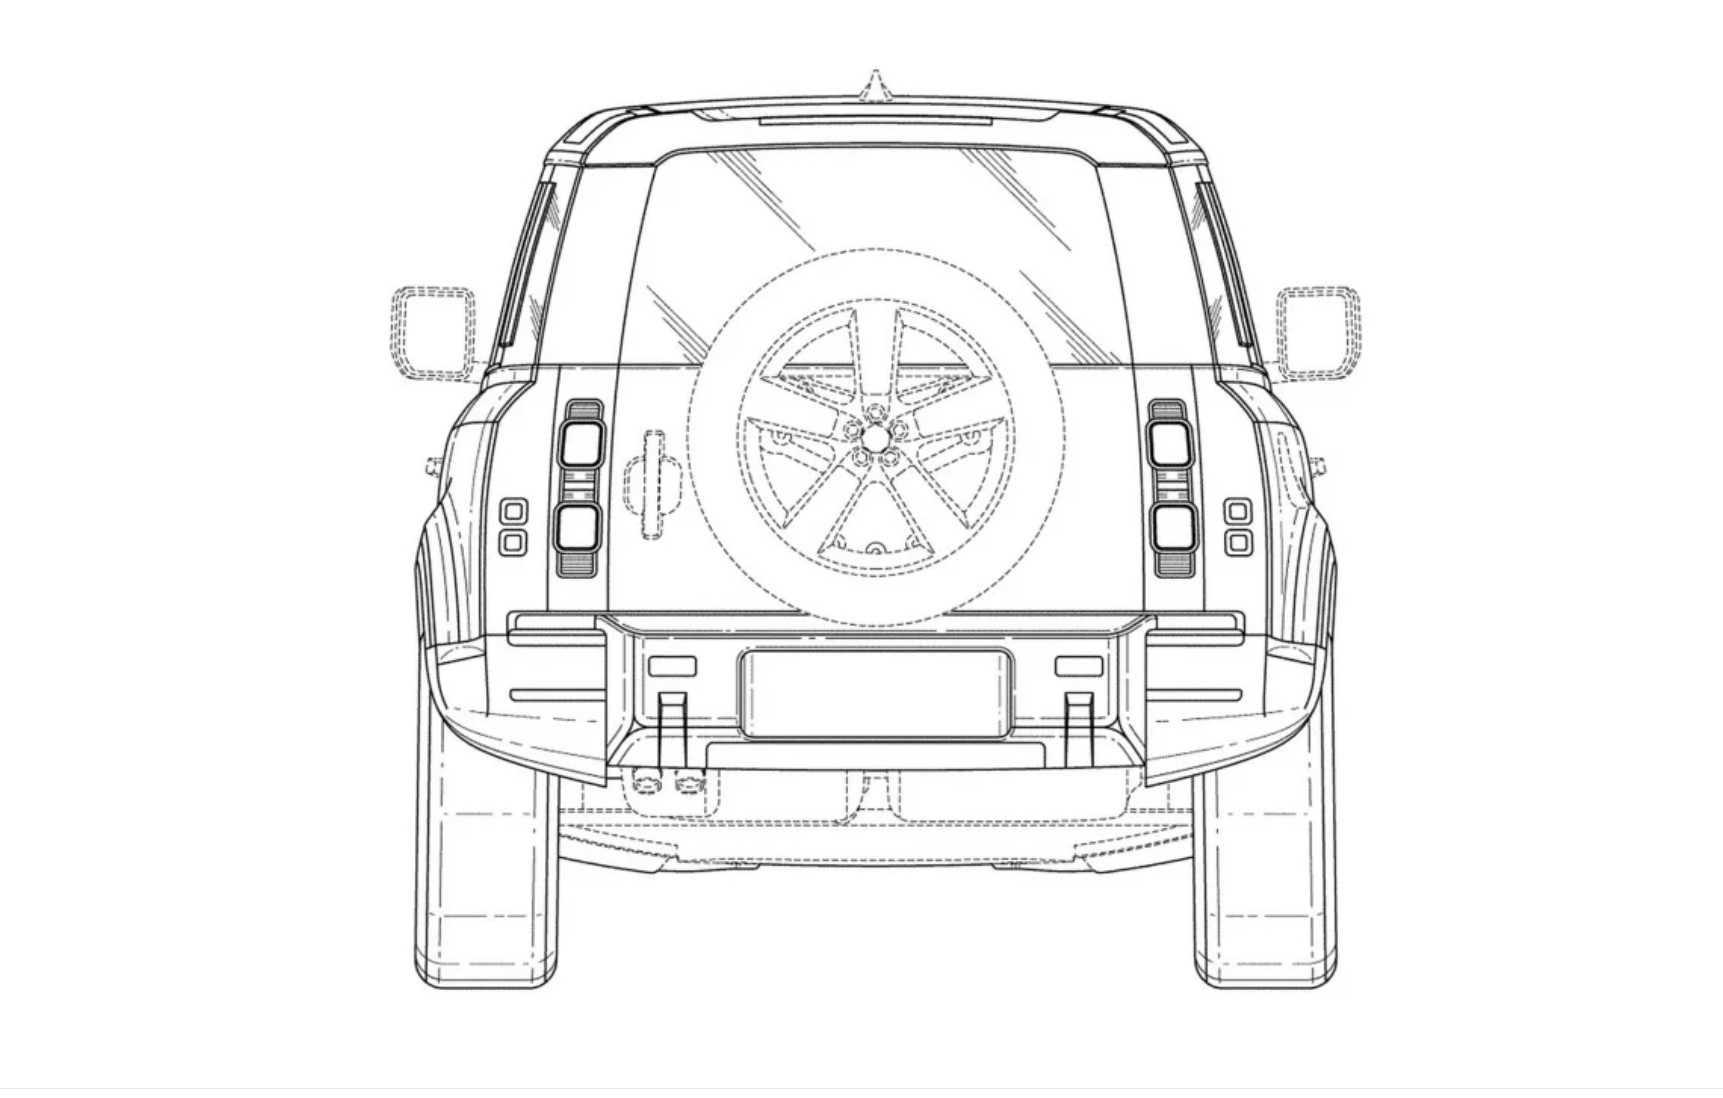 Land Rover Defender 130 patent images 4